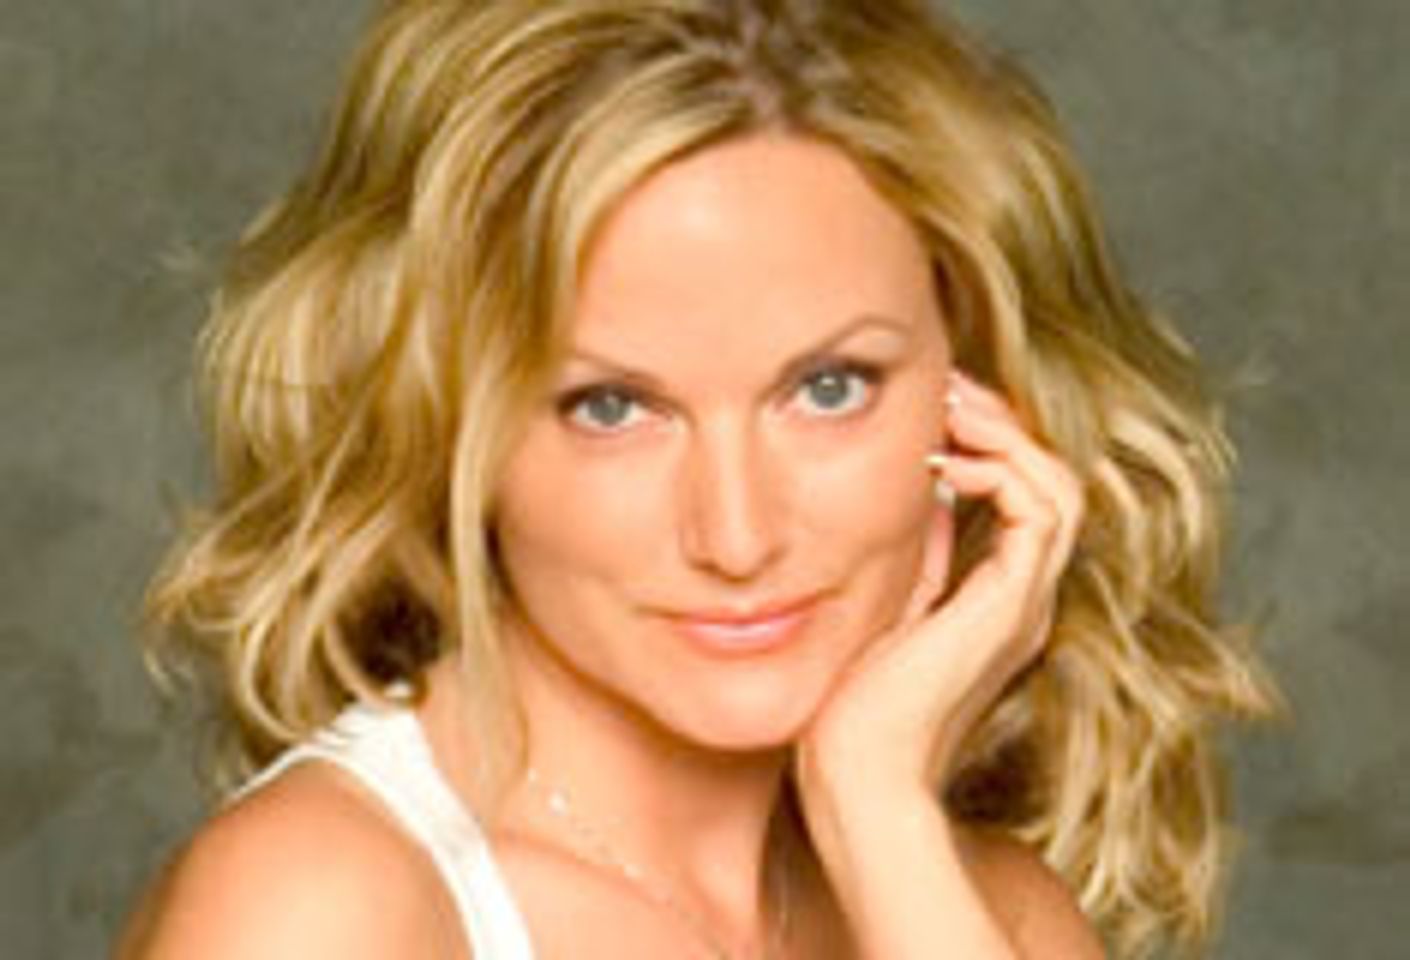 Stacy Valentine Recruits for Penthouse